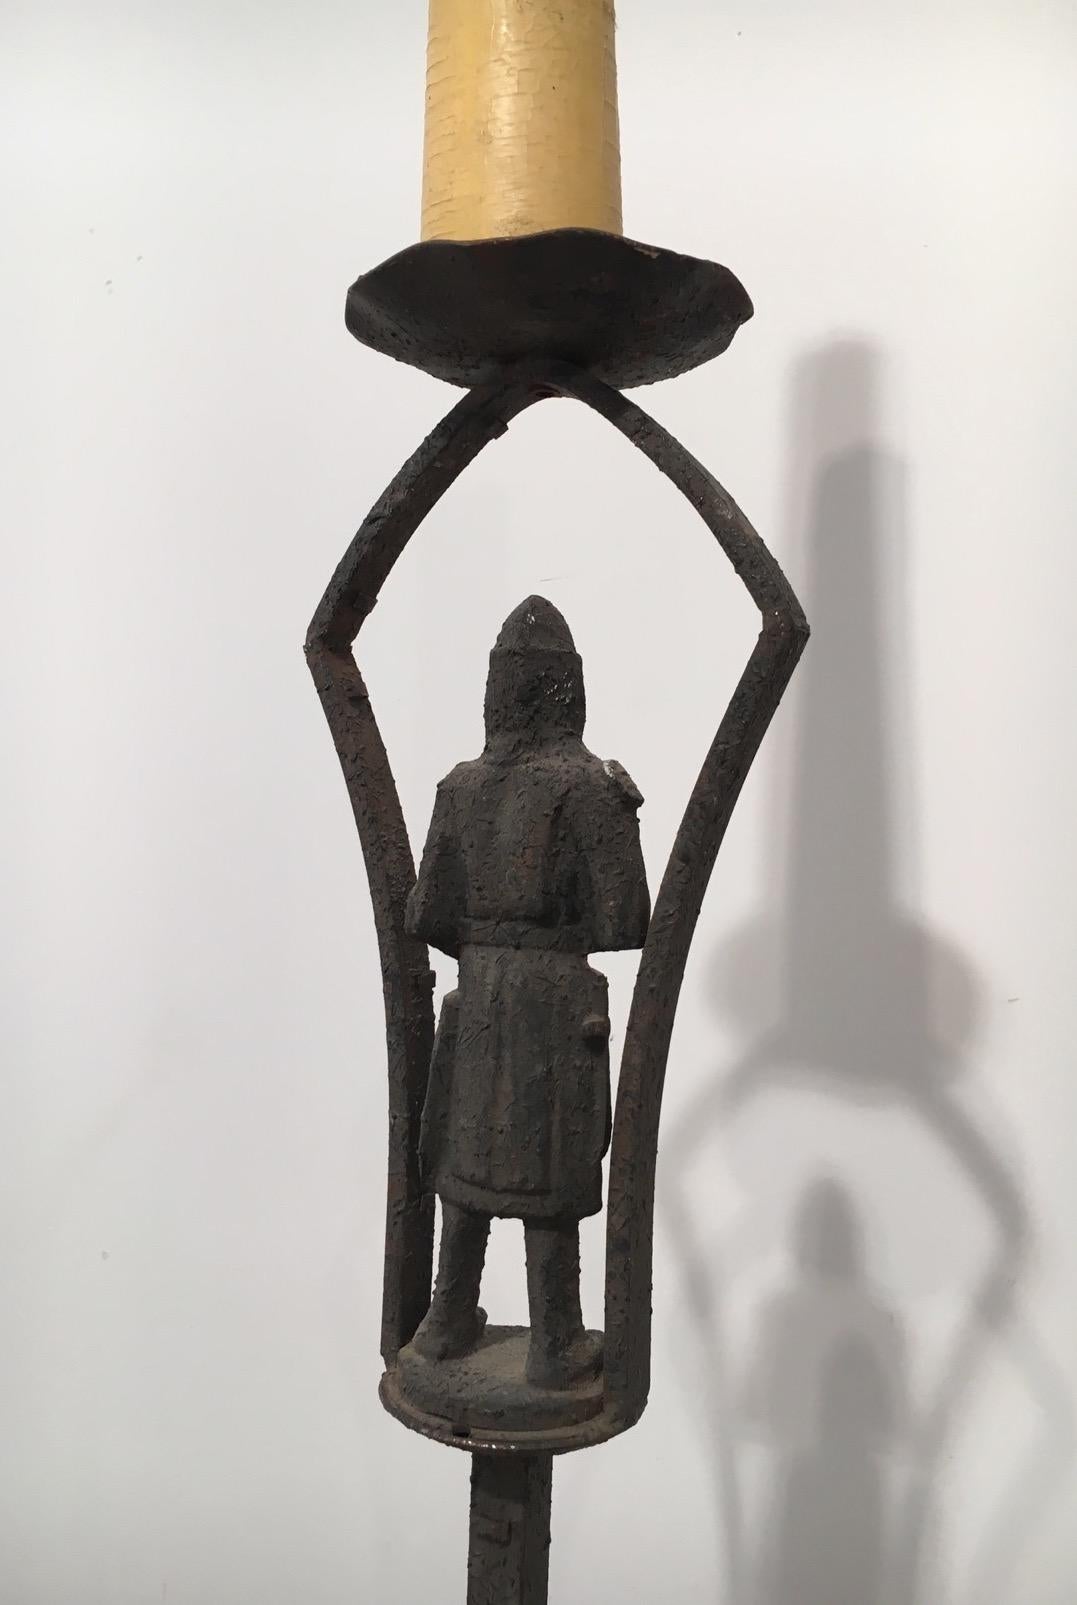 Mid-20th Century Neo-Gothic Wrought Iron Floor lamp with Soldier in Armor, French, circa 1950